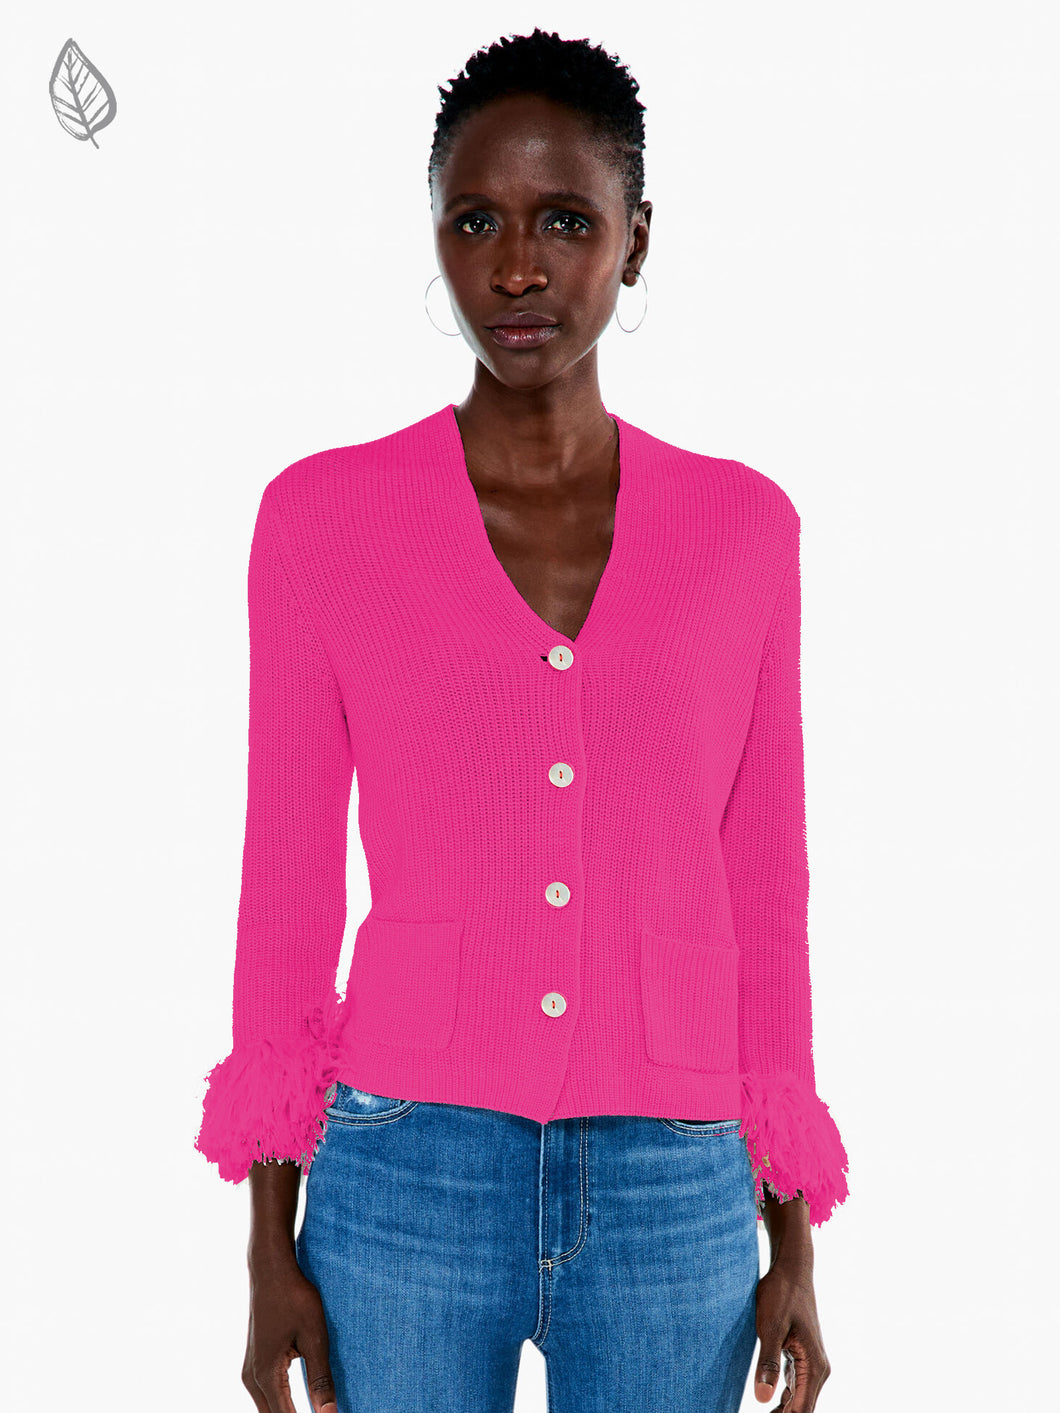 A timeless cardigan with a modern, romantic twist. Featuring intricate fringe detail on the sleeves, this cardigan is crafted of midweight knit fabric with a classic V-neckline and long sleeves with fringe cuffs. It has a regular fit and two patch pockets, finishing at the hip with a straight hemline. An elevated look that's anything but ordinary. Color- Shocking pink. Classic midweight knit fabrication. V-neckline. Long sleeves with fringe cuffs.  Regular fit. Front patch pockets.